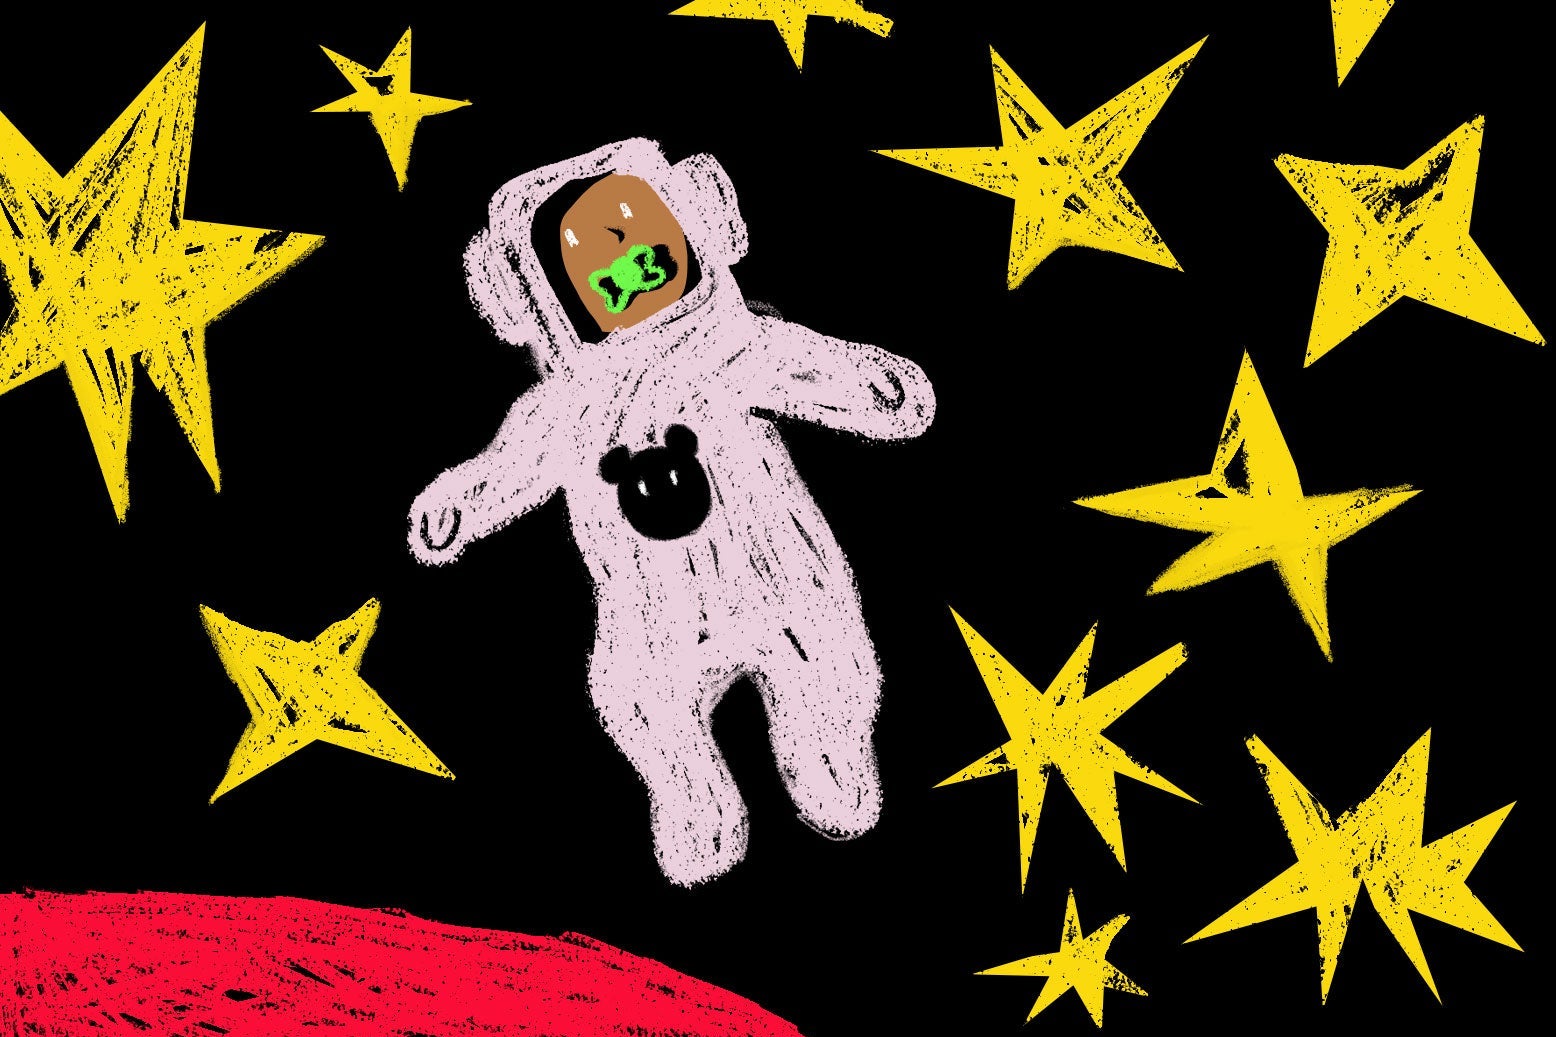 Illustration of a baby in a spacesuit floating in space.